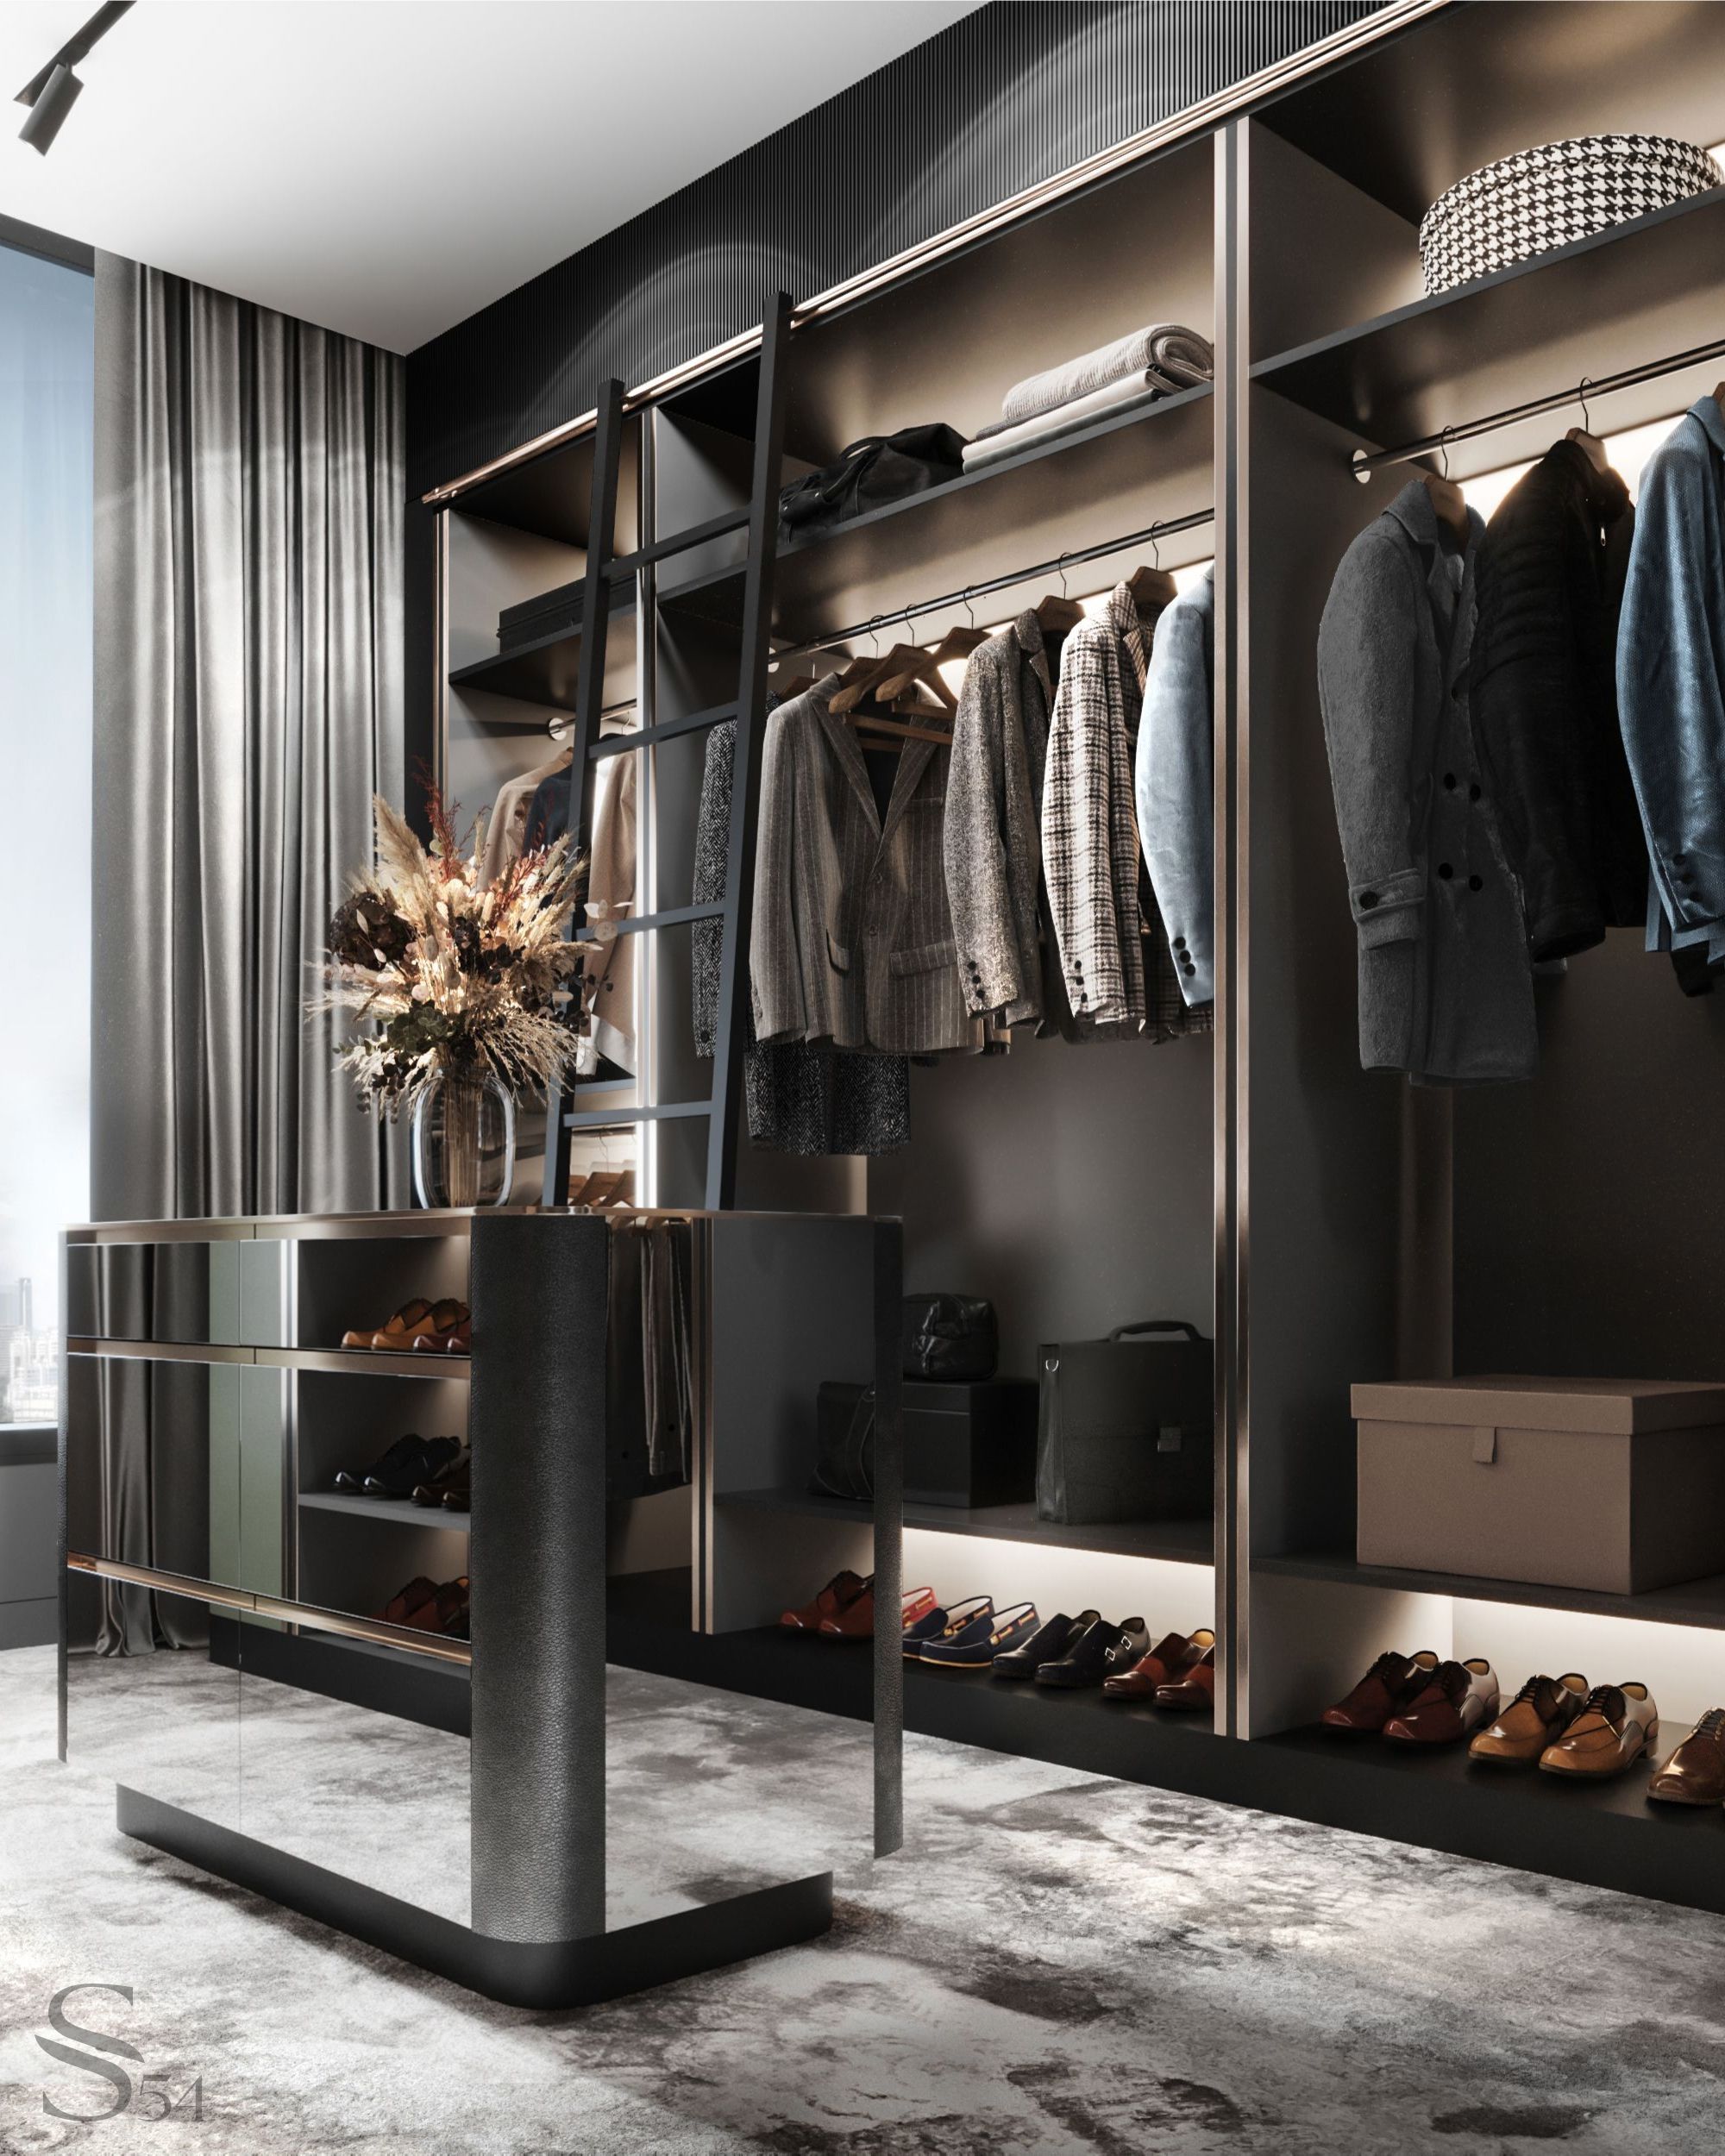 The men's dressing room is characterized by minimalism and strict lines